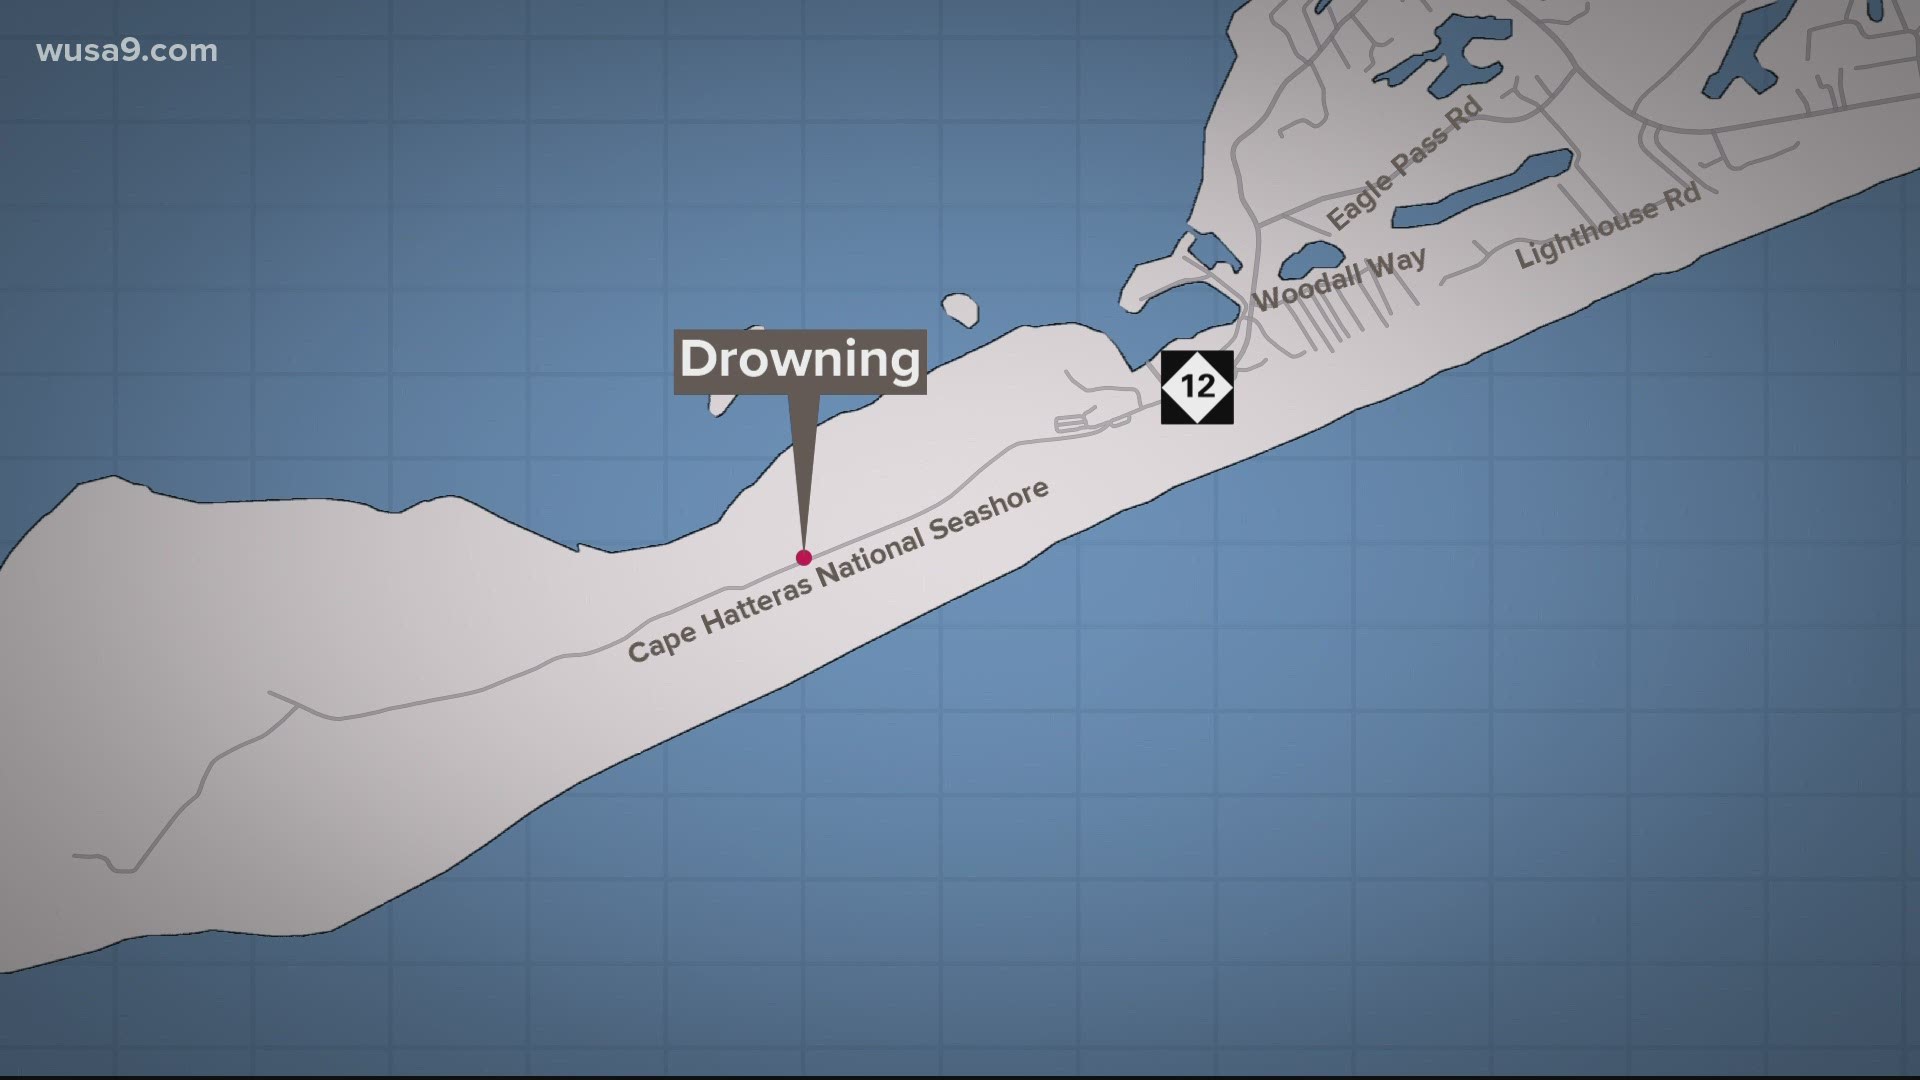 NPS officials said a visitor called saying they saw a body floating in the ocean water in Manteo, NC. The man who drowned was from Falls Church, VA.